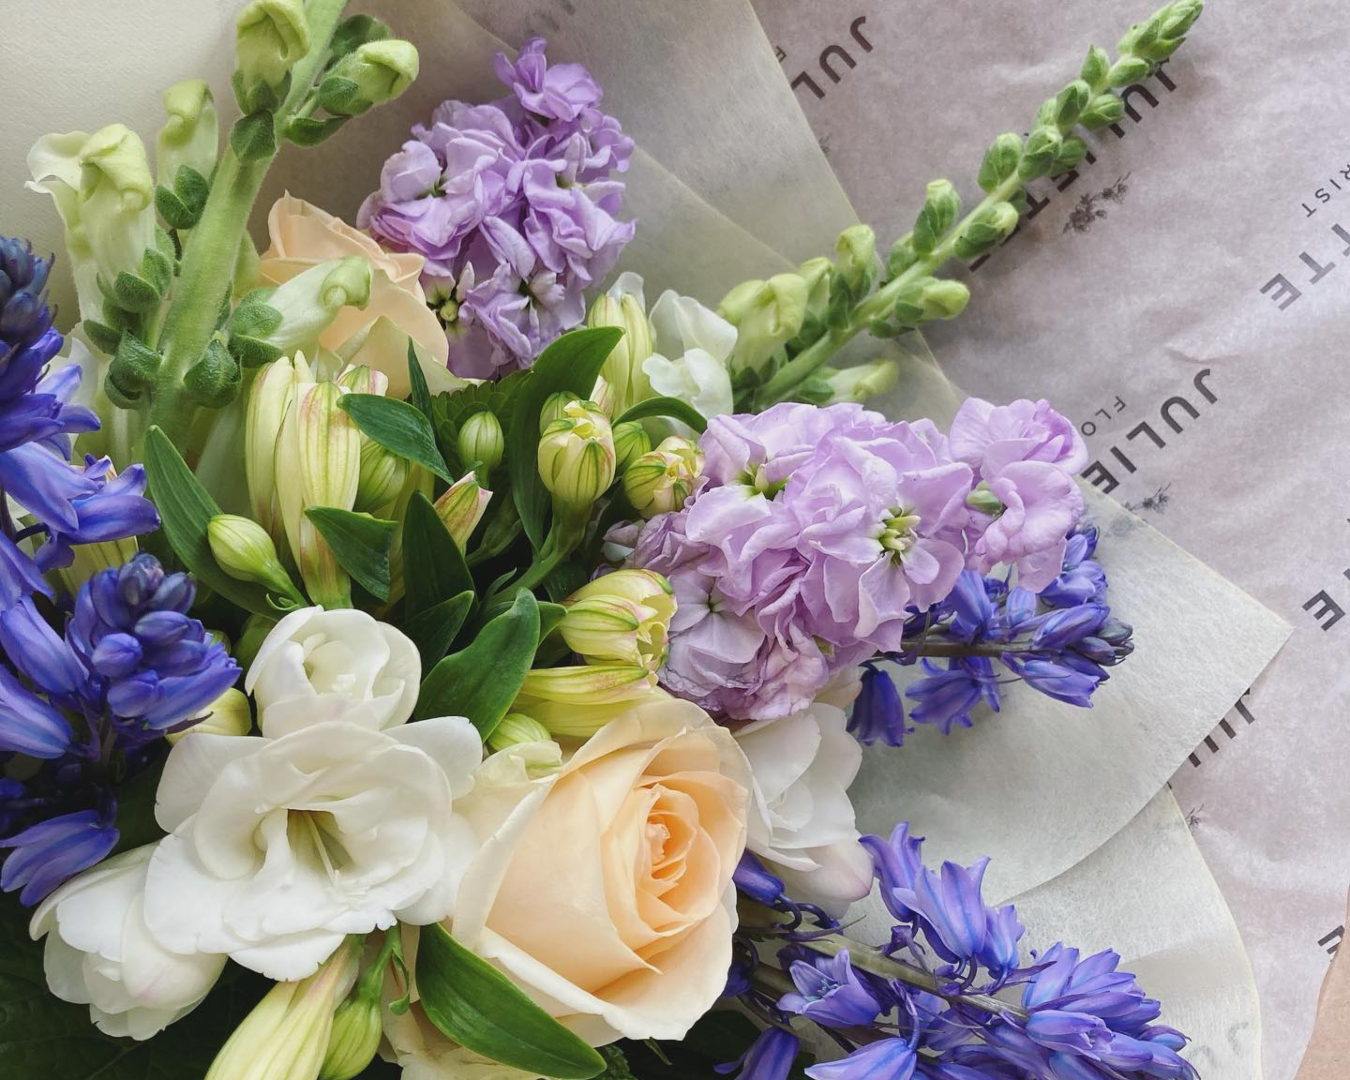 A pretty bouquet of white and purple blooms wrapped in the signature Juliette Florist paper